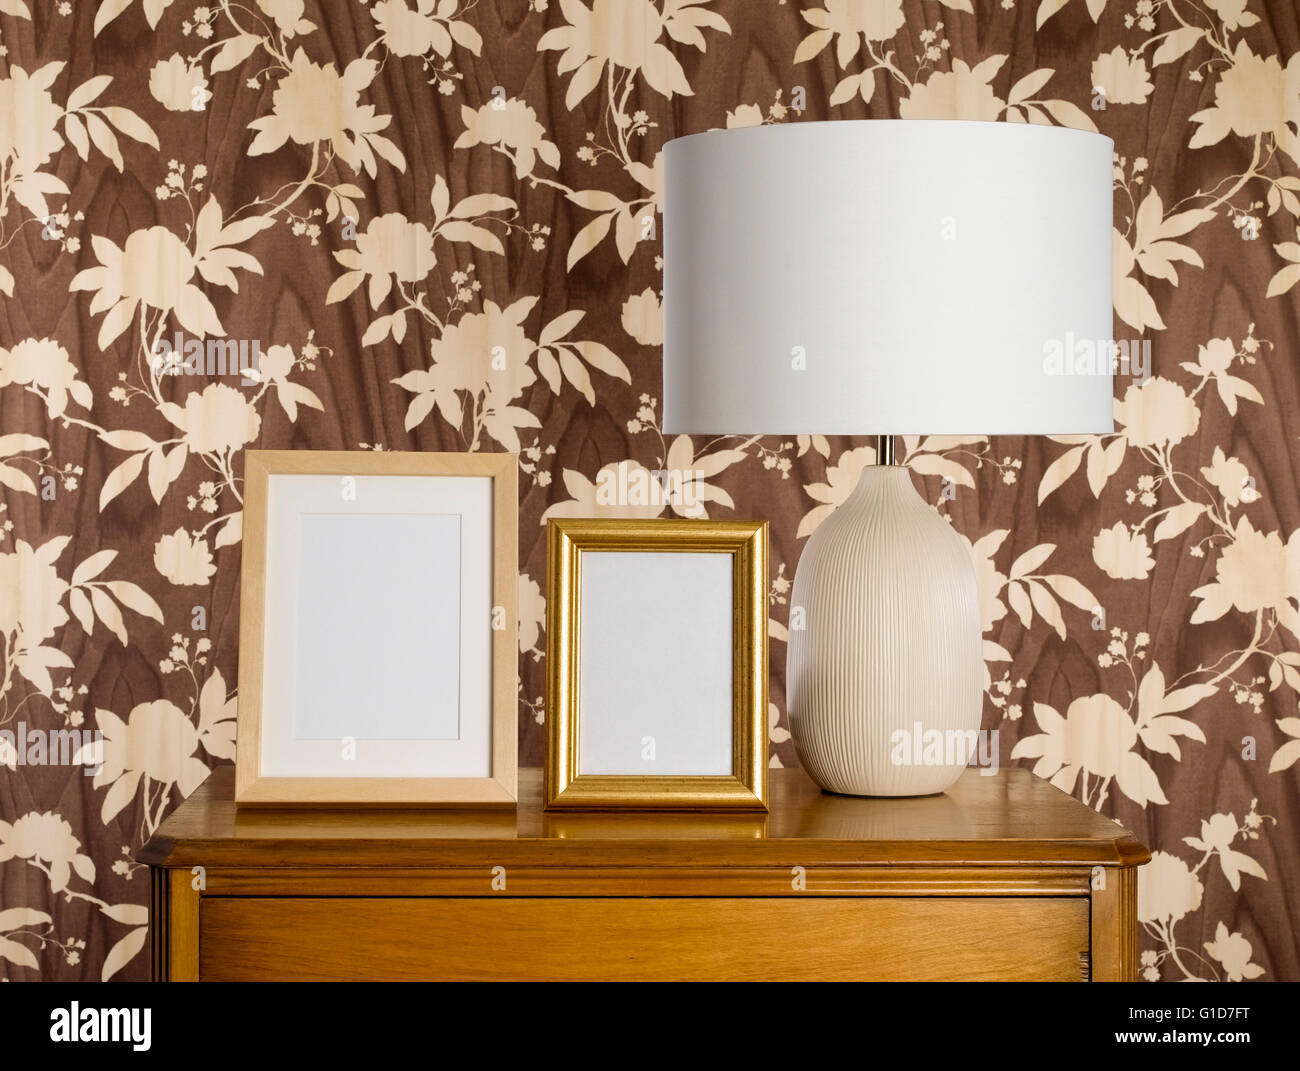 Lampshade on sideboard with blank picture frames Stock Photo